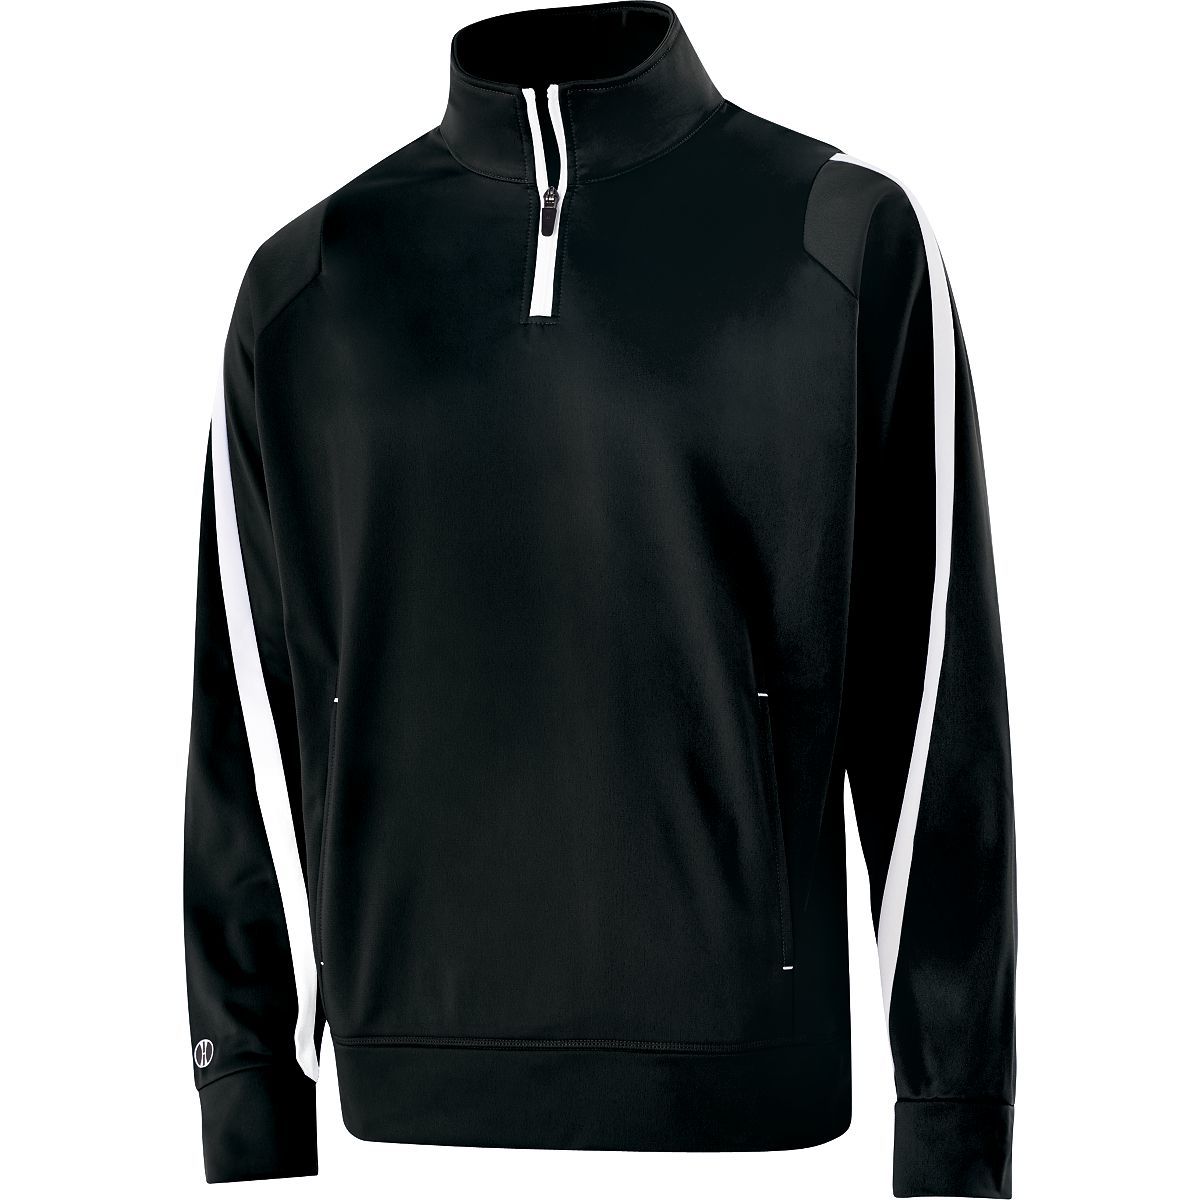 Holloway Determination Pullover in Black/White  -Part of the Adult, Adult-Pullover, Holloway, Outerwear product lines at KanaleyCreations.com